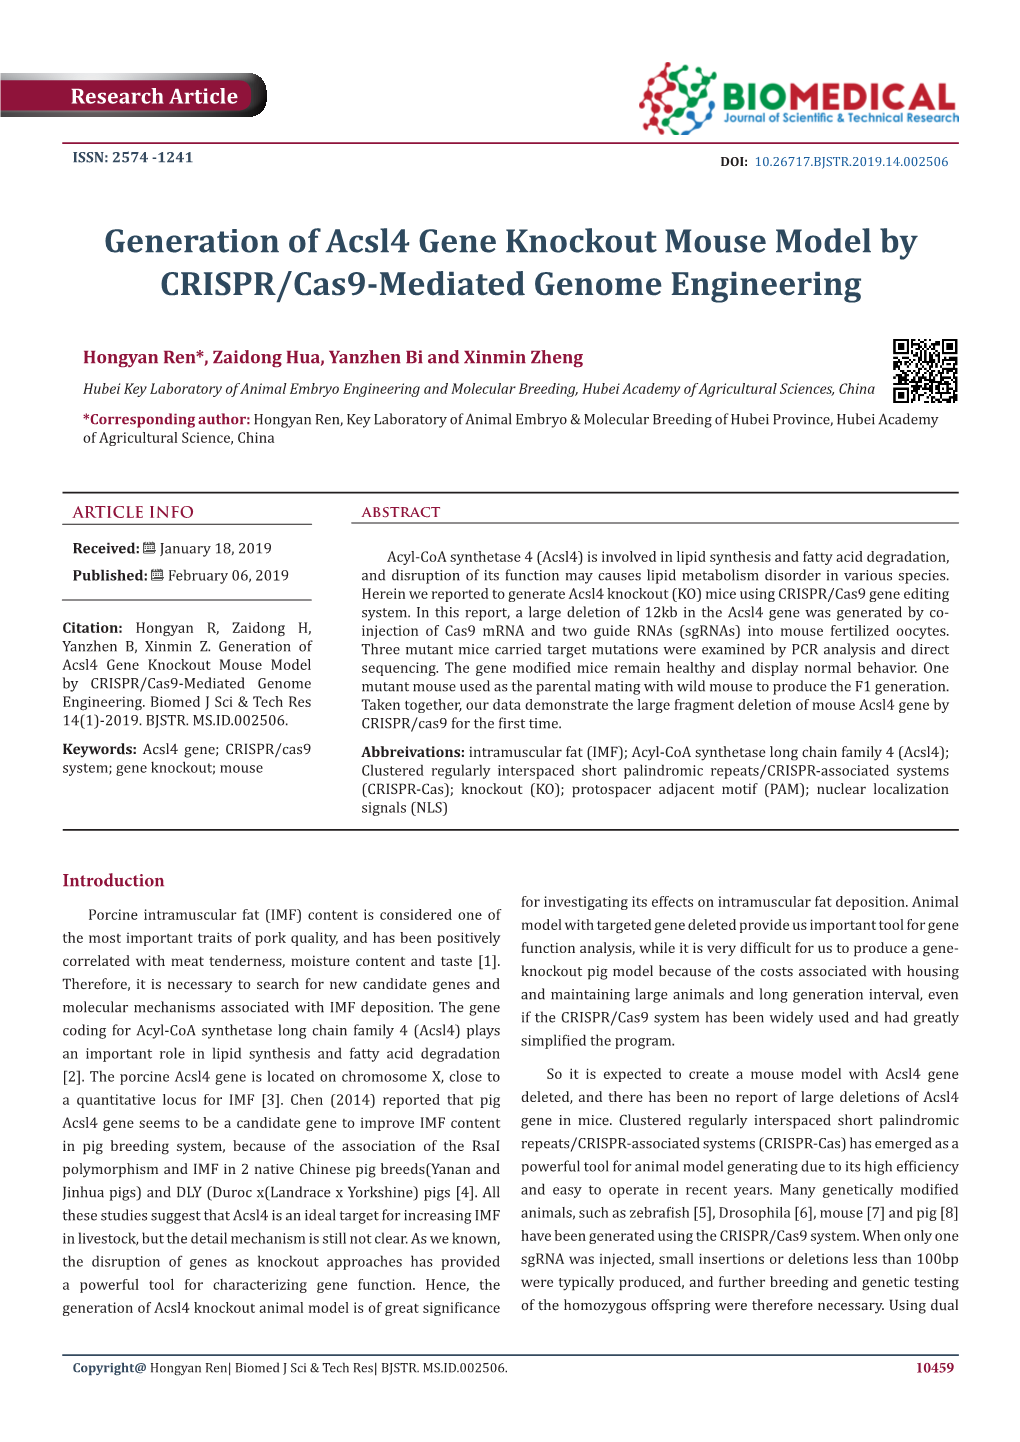 Generation of Acsl4 Gene Knockout Mouse Model by CRISPR/Cas9-Mediated Genome Engineering